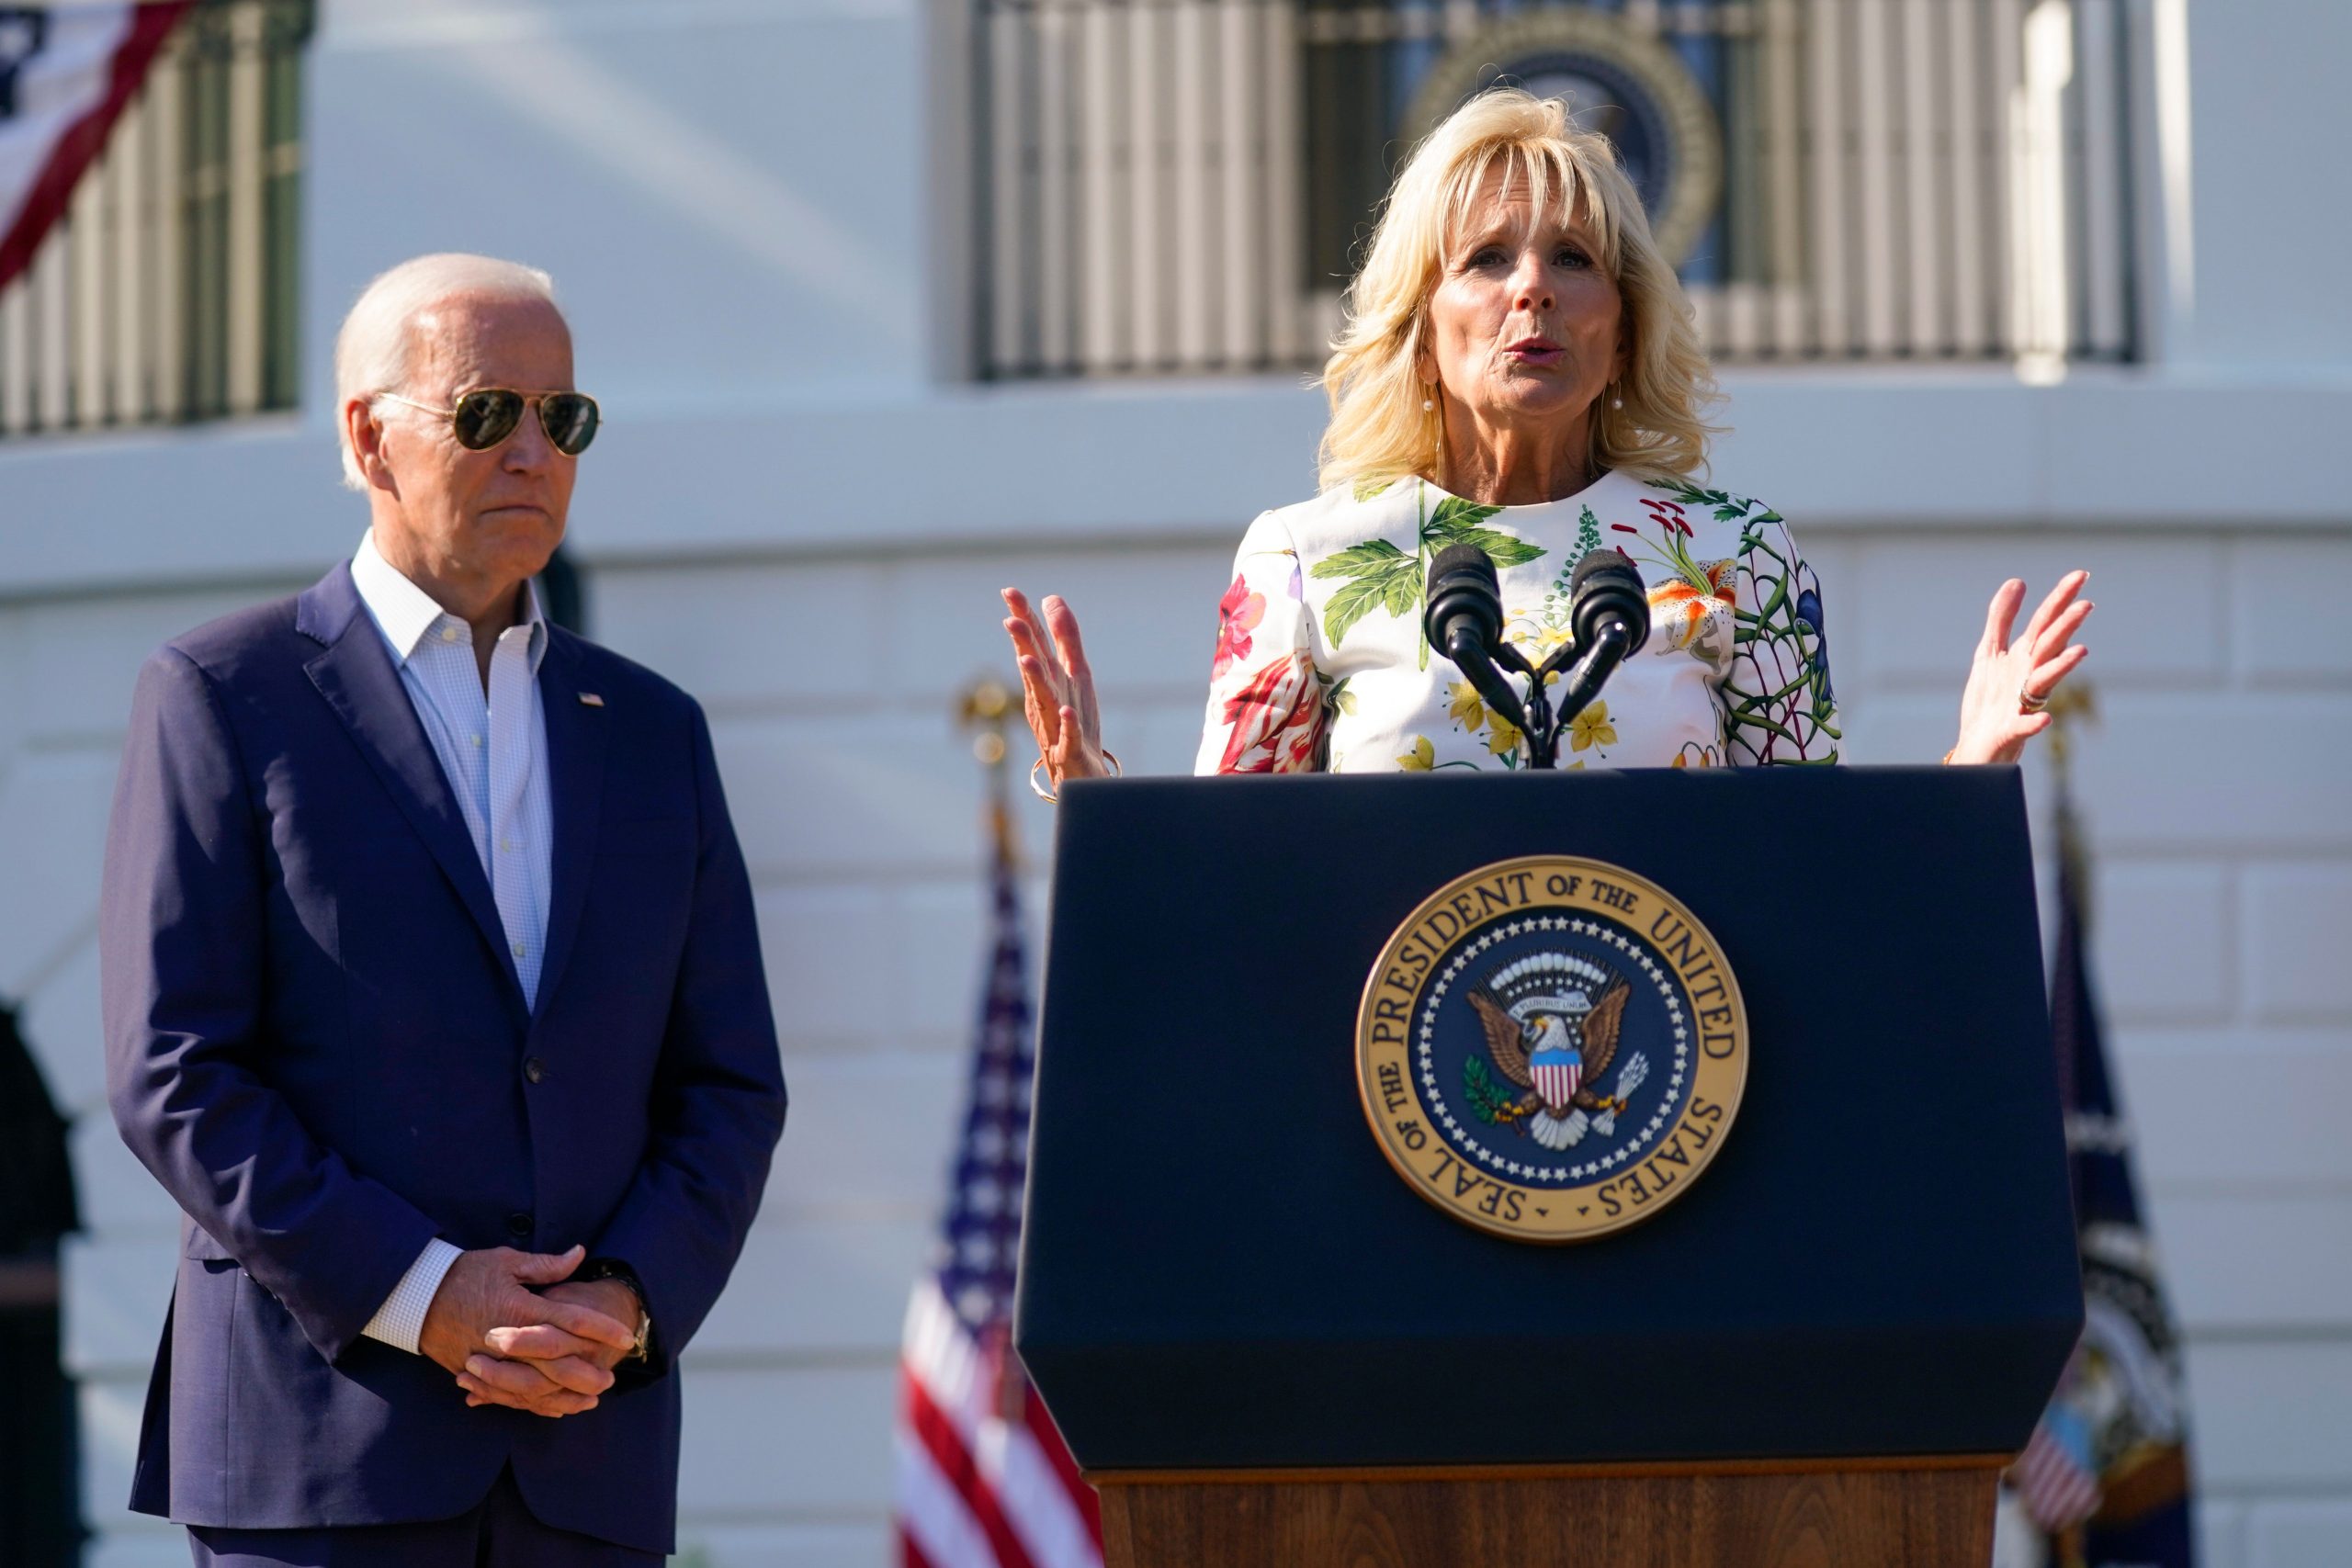 Jill Biden, US First Lady, compares Latinos to ‘breakfast tacos’, draws flak